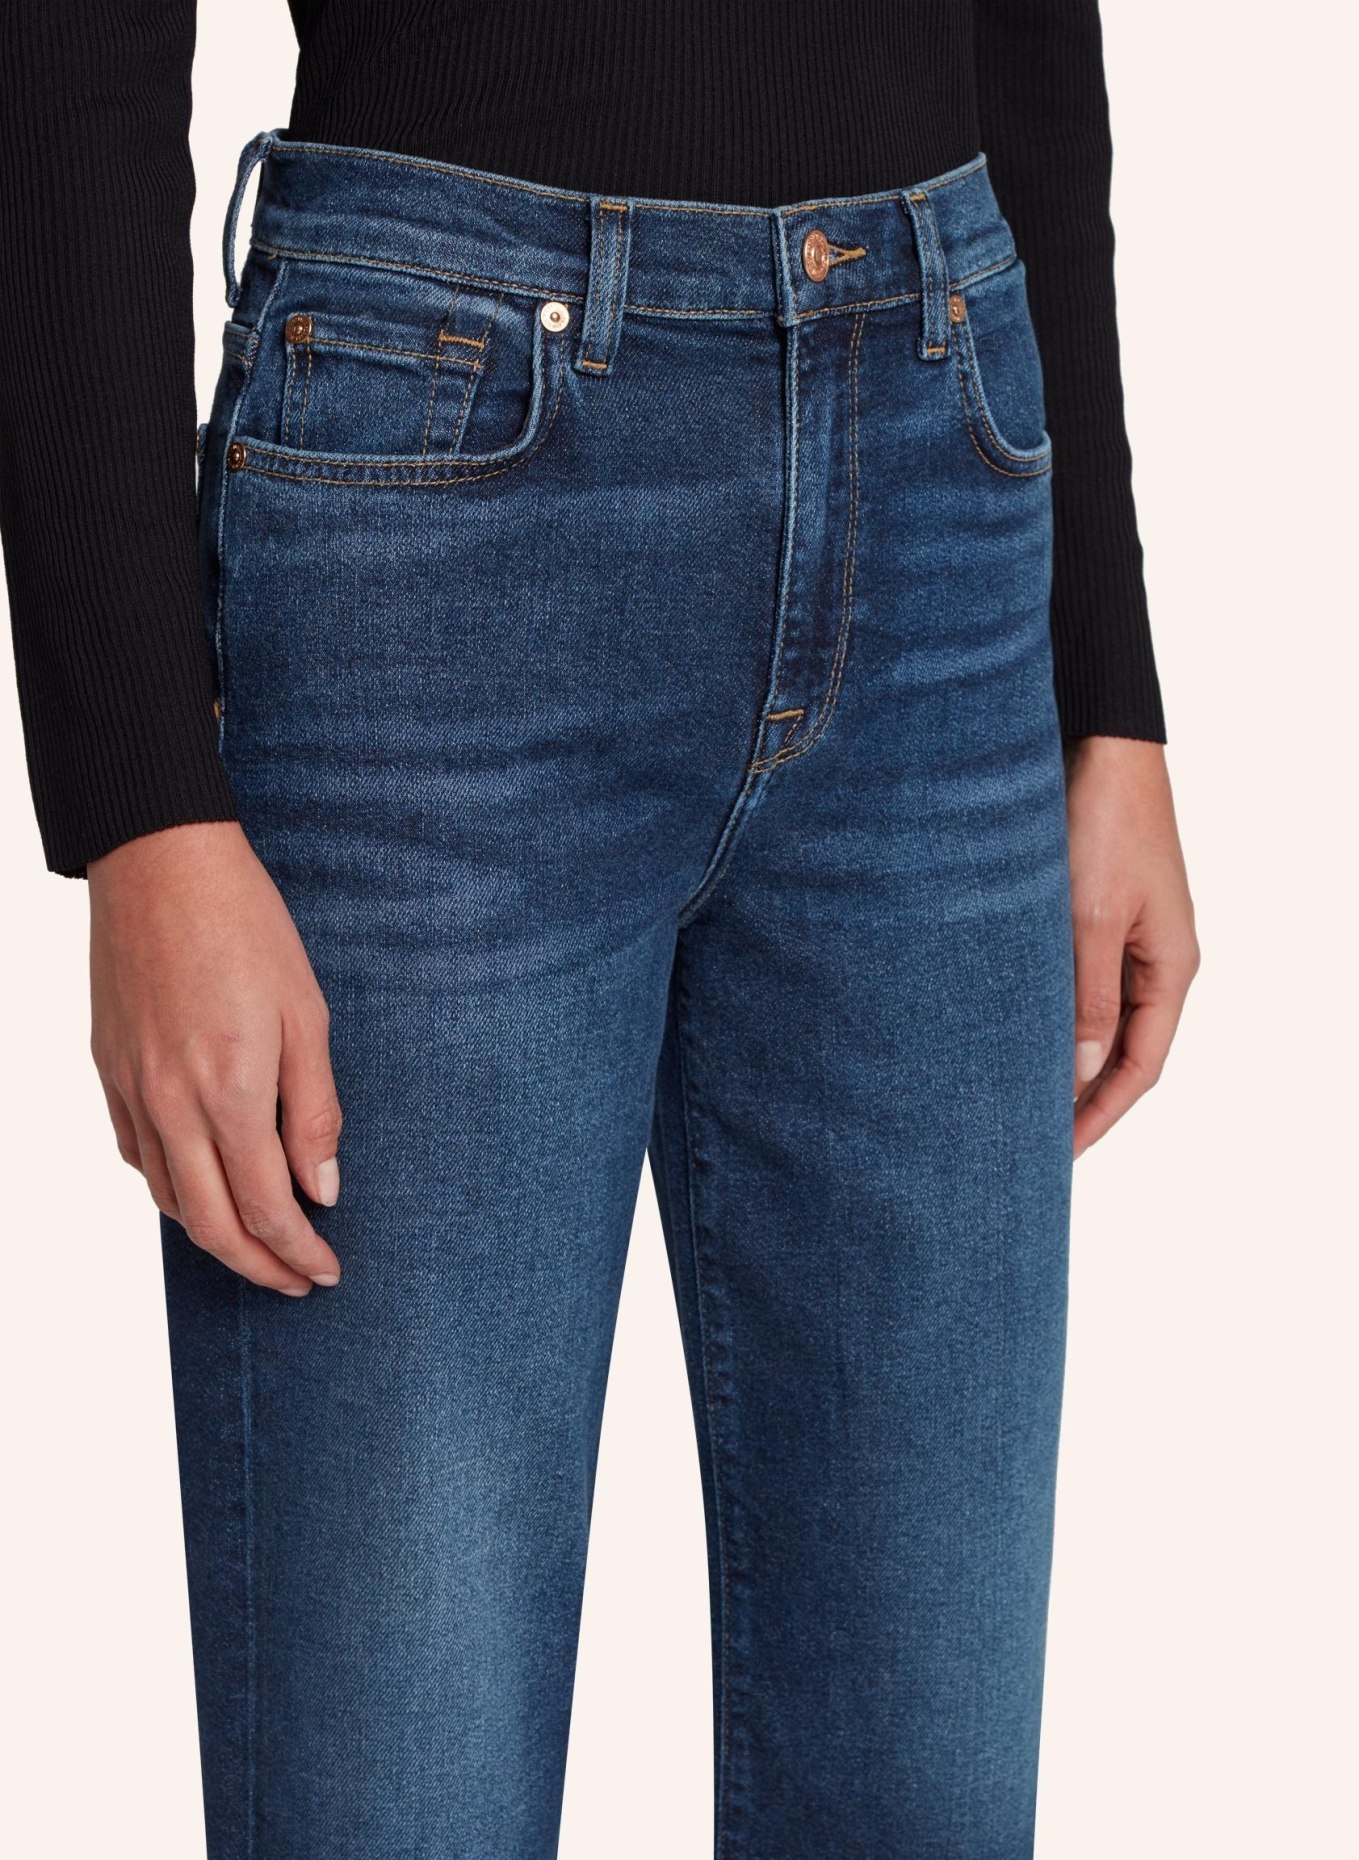 7 for all mankind Jeans CROPPED ALEXA Flare Fit, Farbe: BLAU (Bild 3)